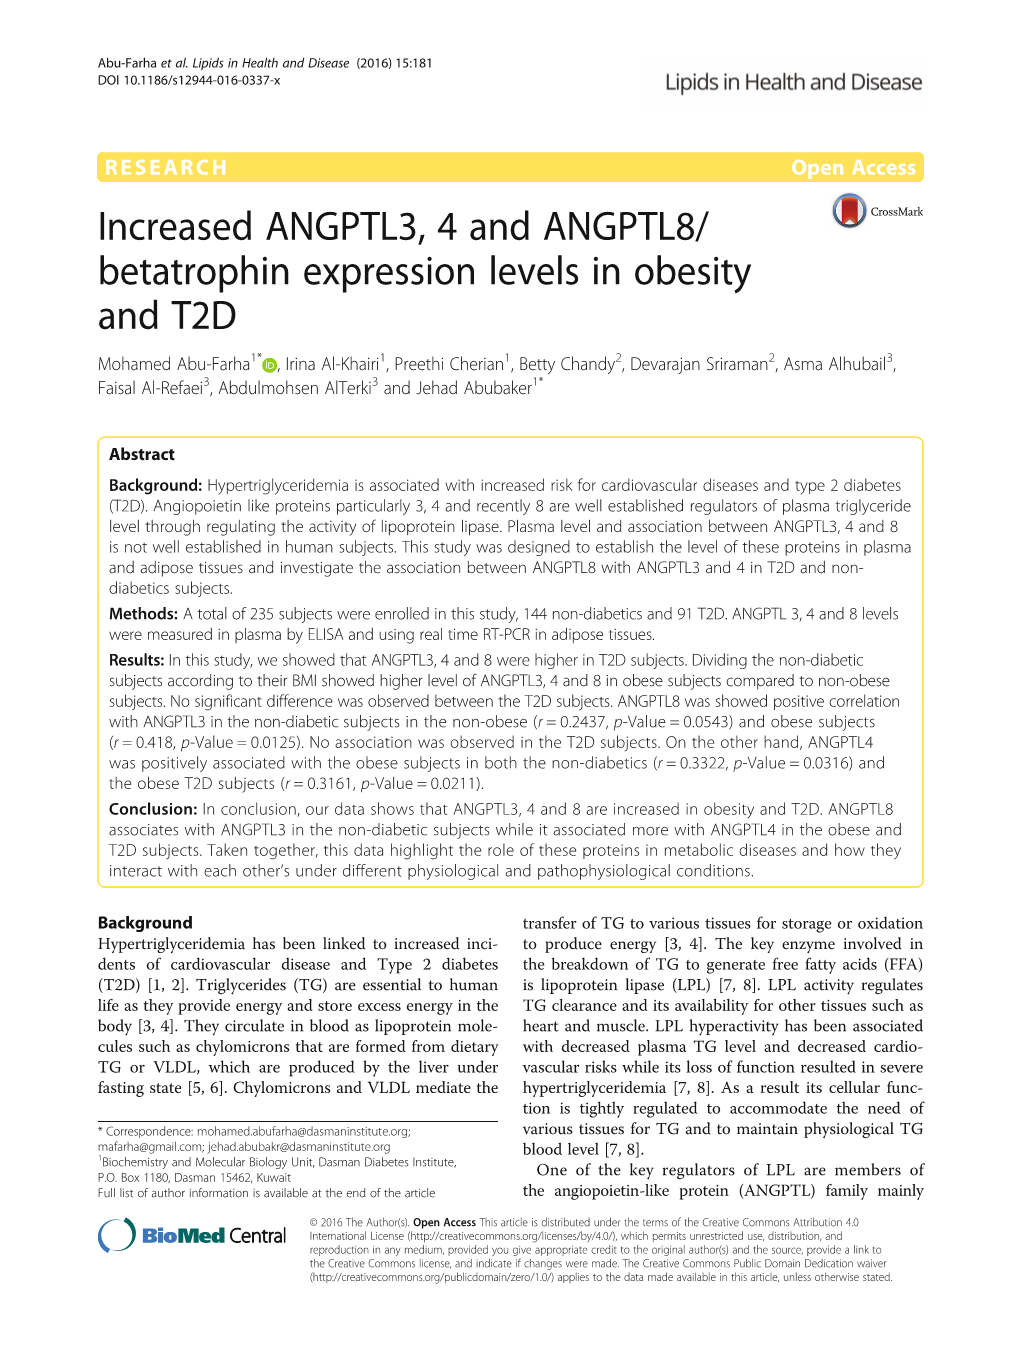 Increased ANGPTL3, 4 and ANGPTL8/Betatrophin Expression Levels In